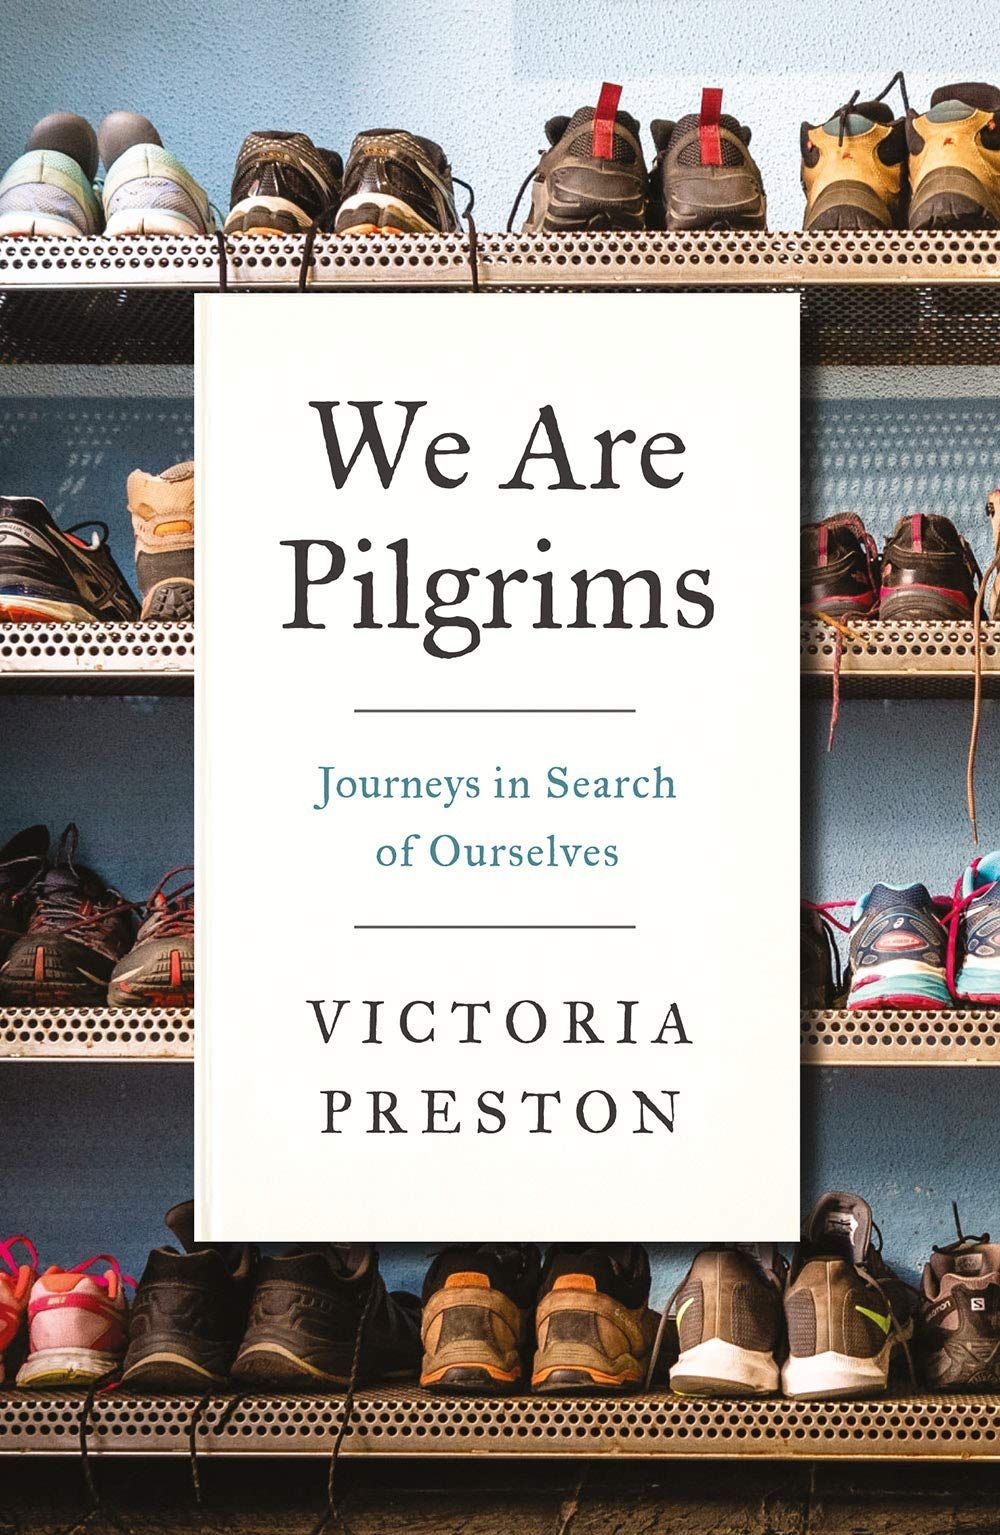 The Stations of Life: On “We Are Pilgrims: Journeys in Search of Ourselves”